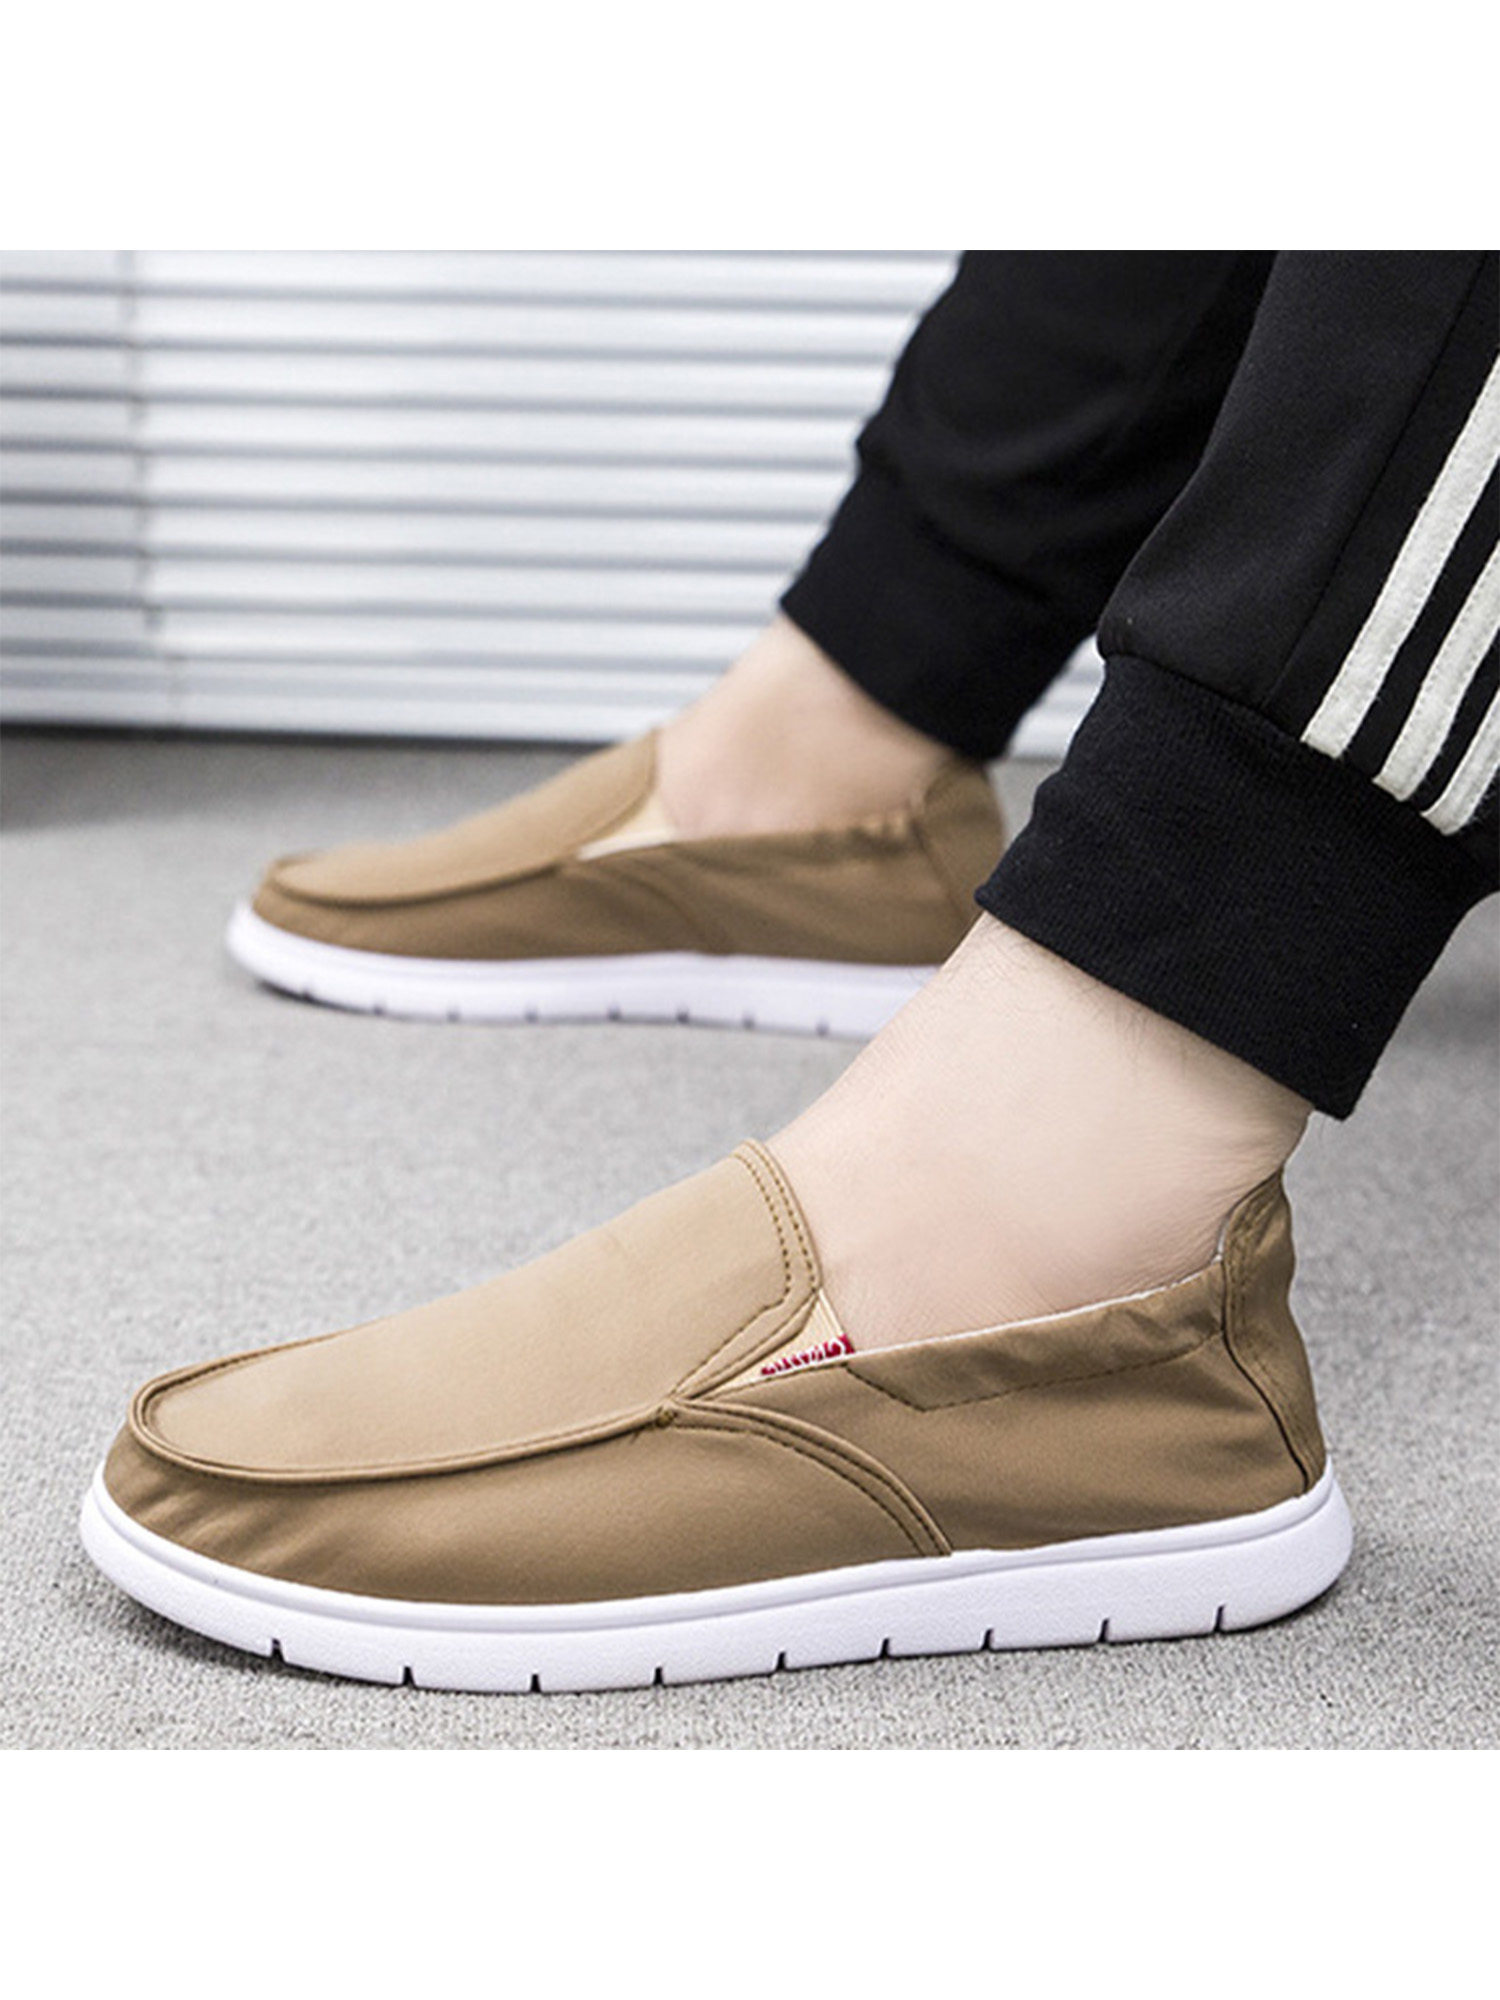 UKAP Casual Canvas Shoes for Men Slip On Loafers Deck Shoes Comfortable Boat Shoes Outdoor Fashion - image 4 of 8